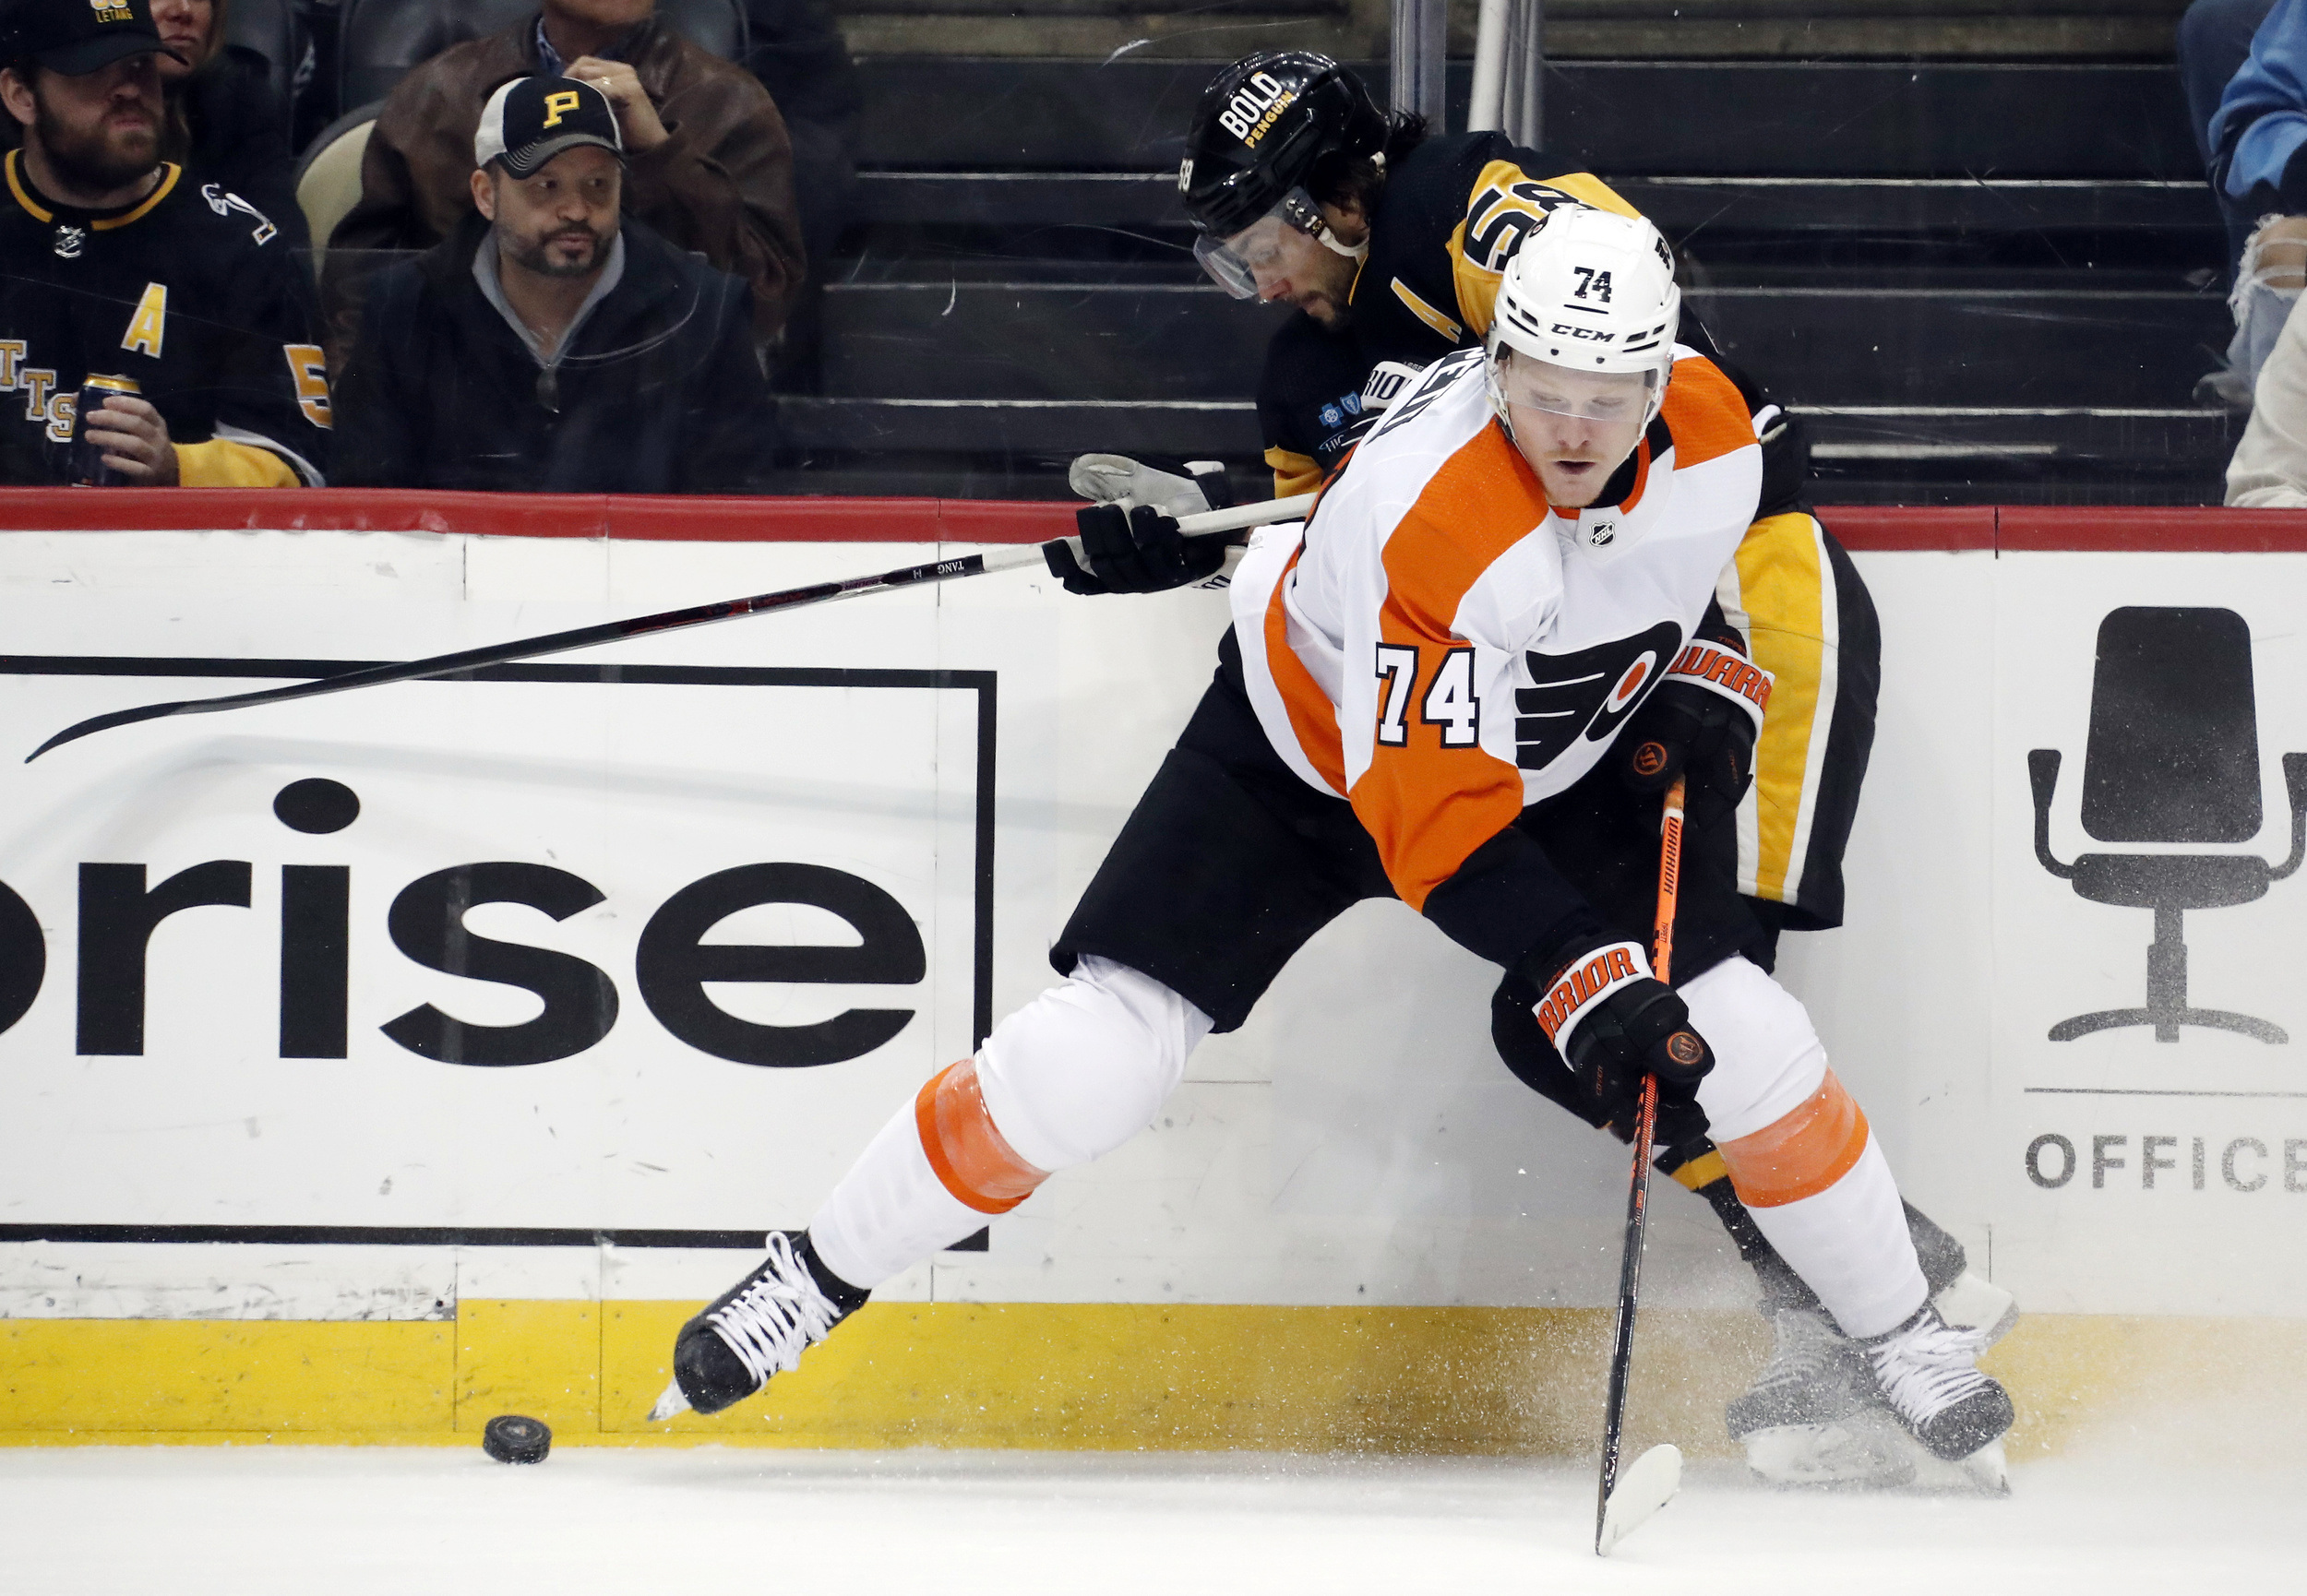 Claude Giroux to the Avalanche? “I think Colorado is the perfect